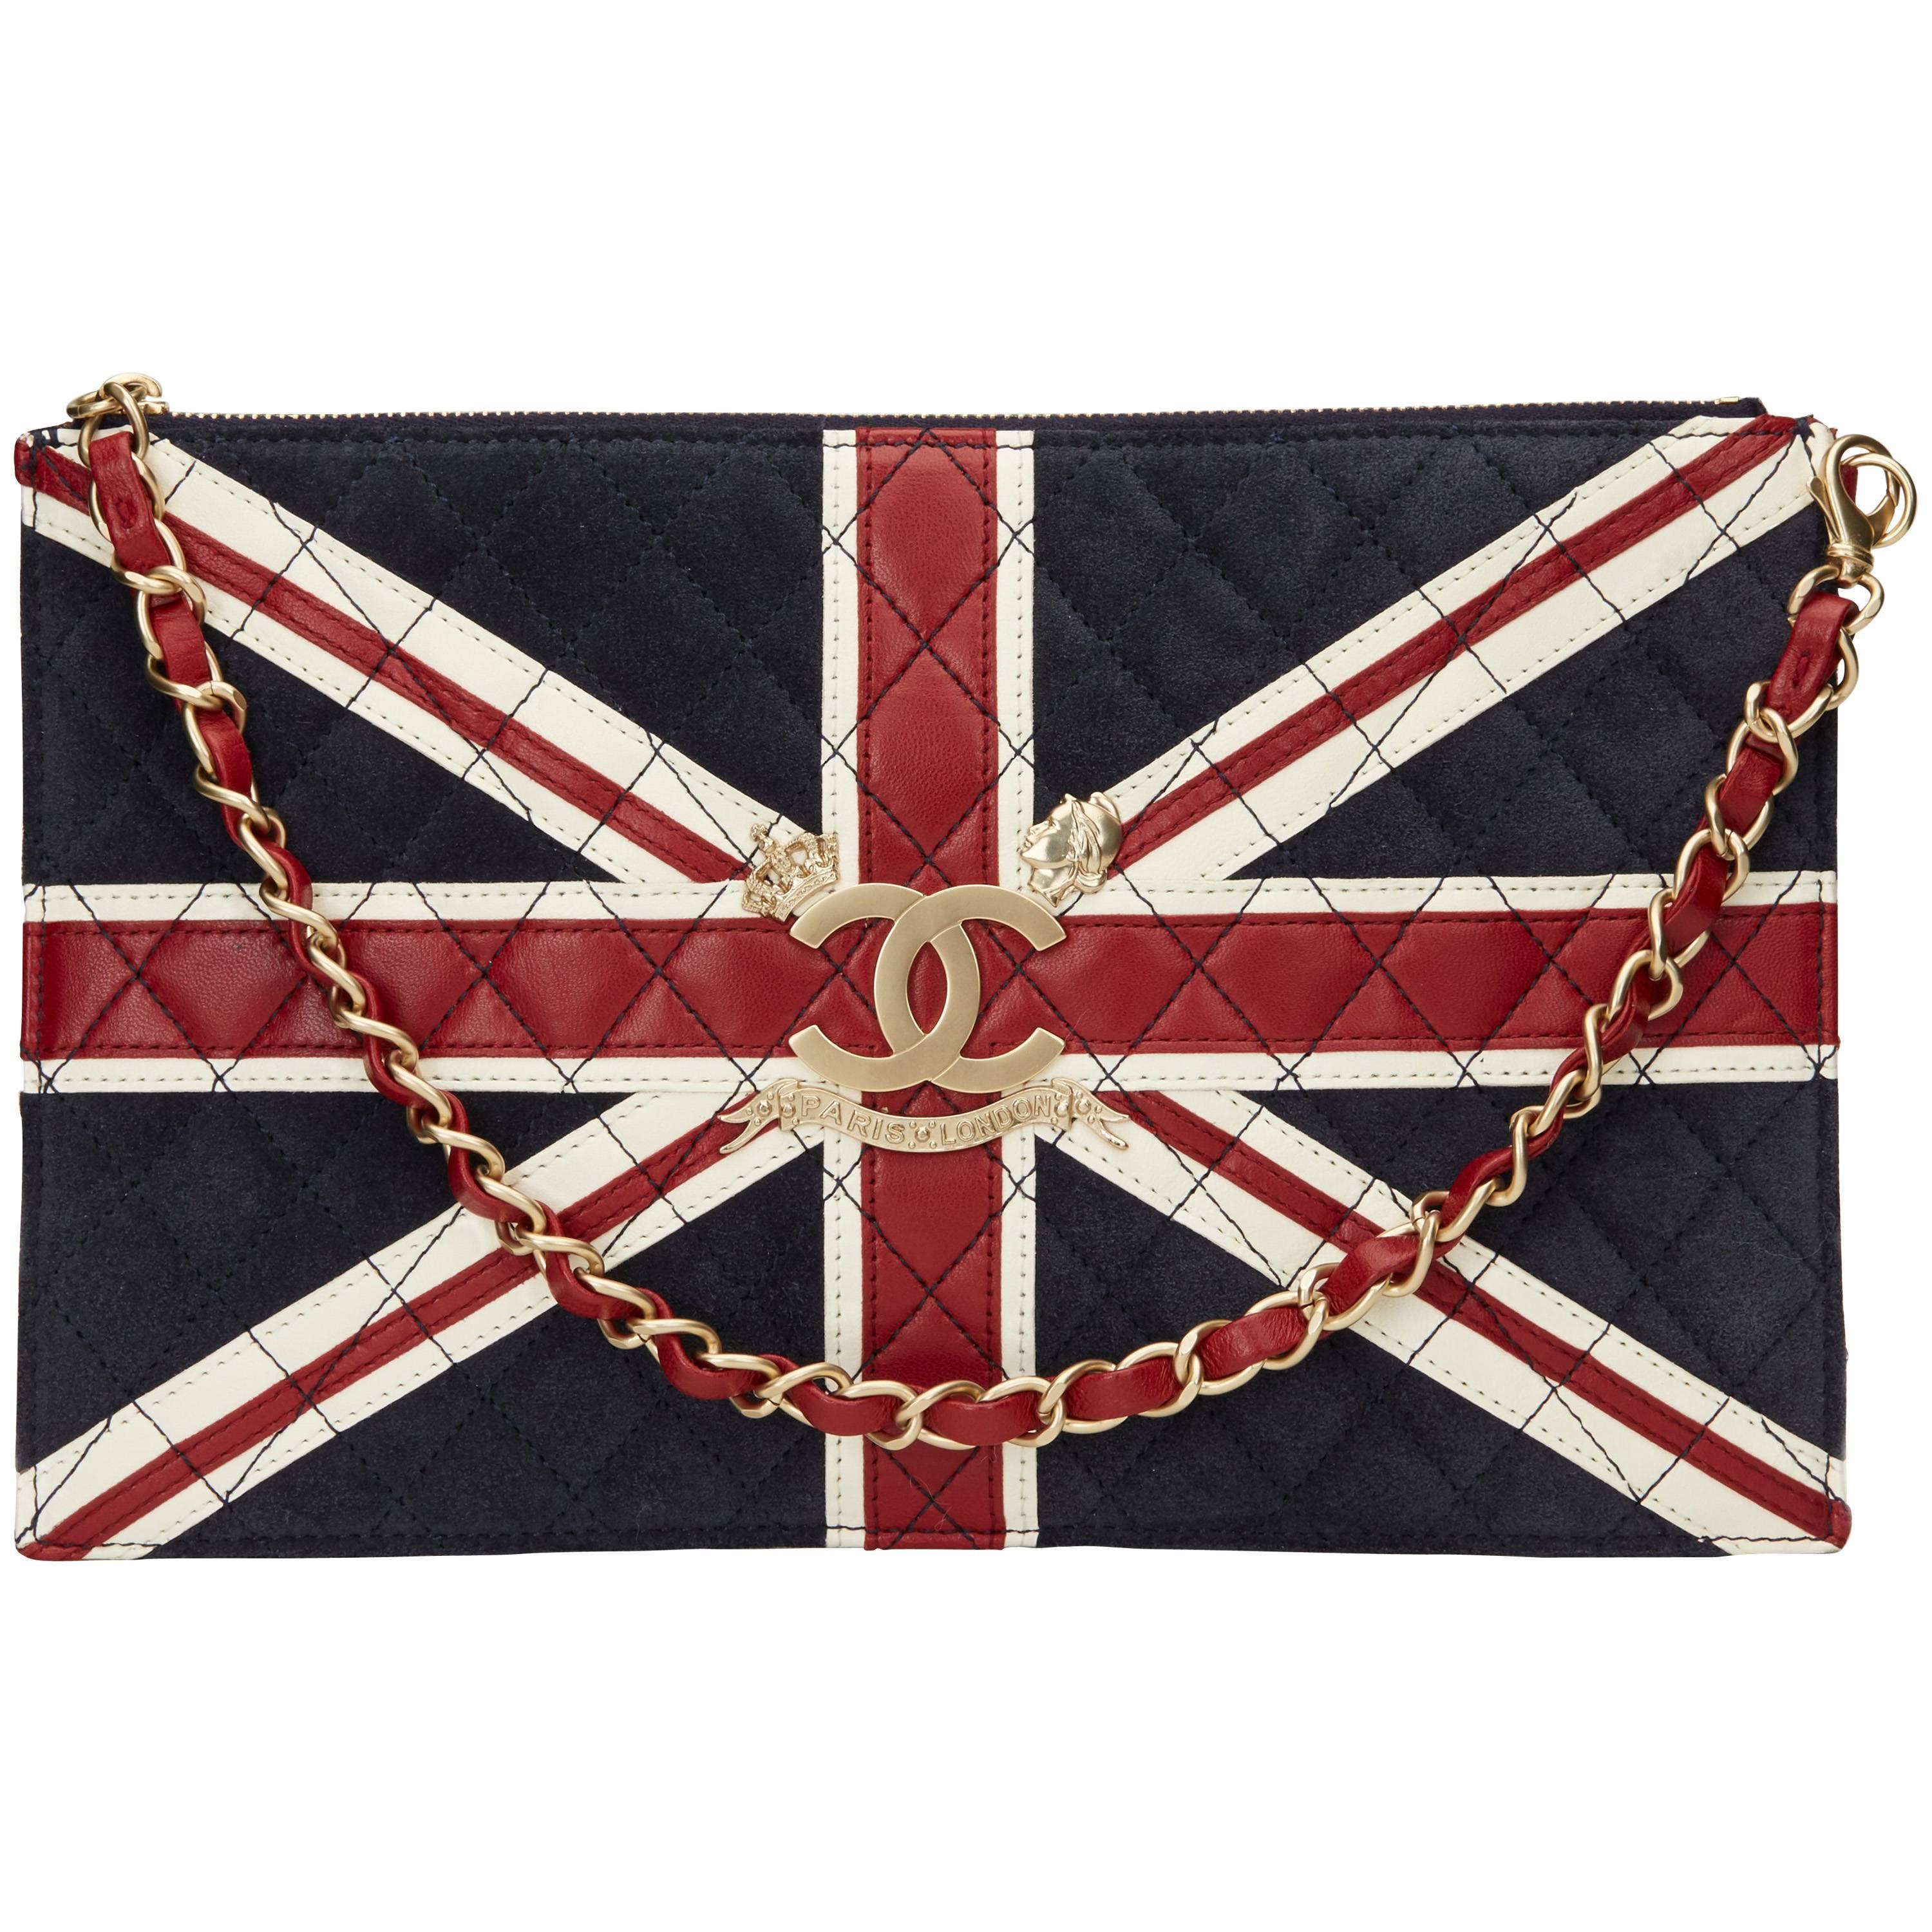 2000s Chanel Navy Suede, Red & White Lambskin Union Jack Pouch